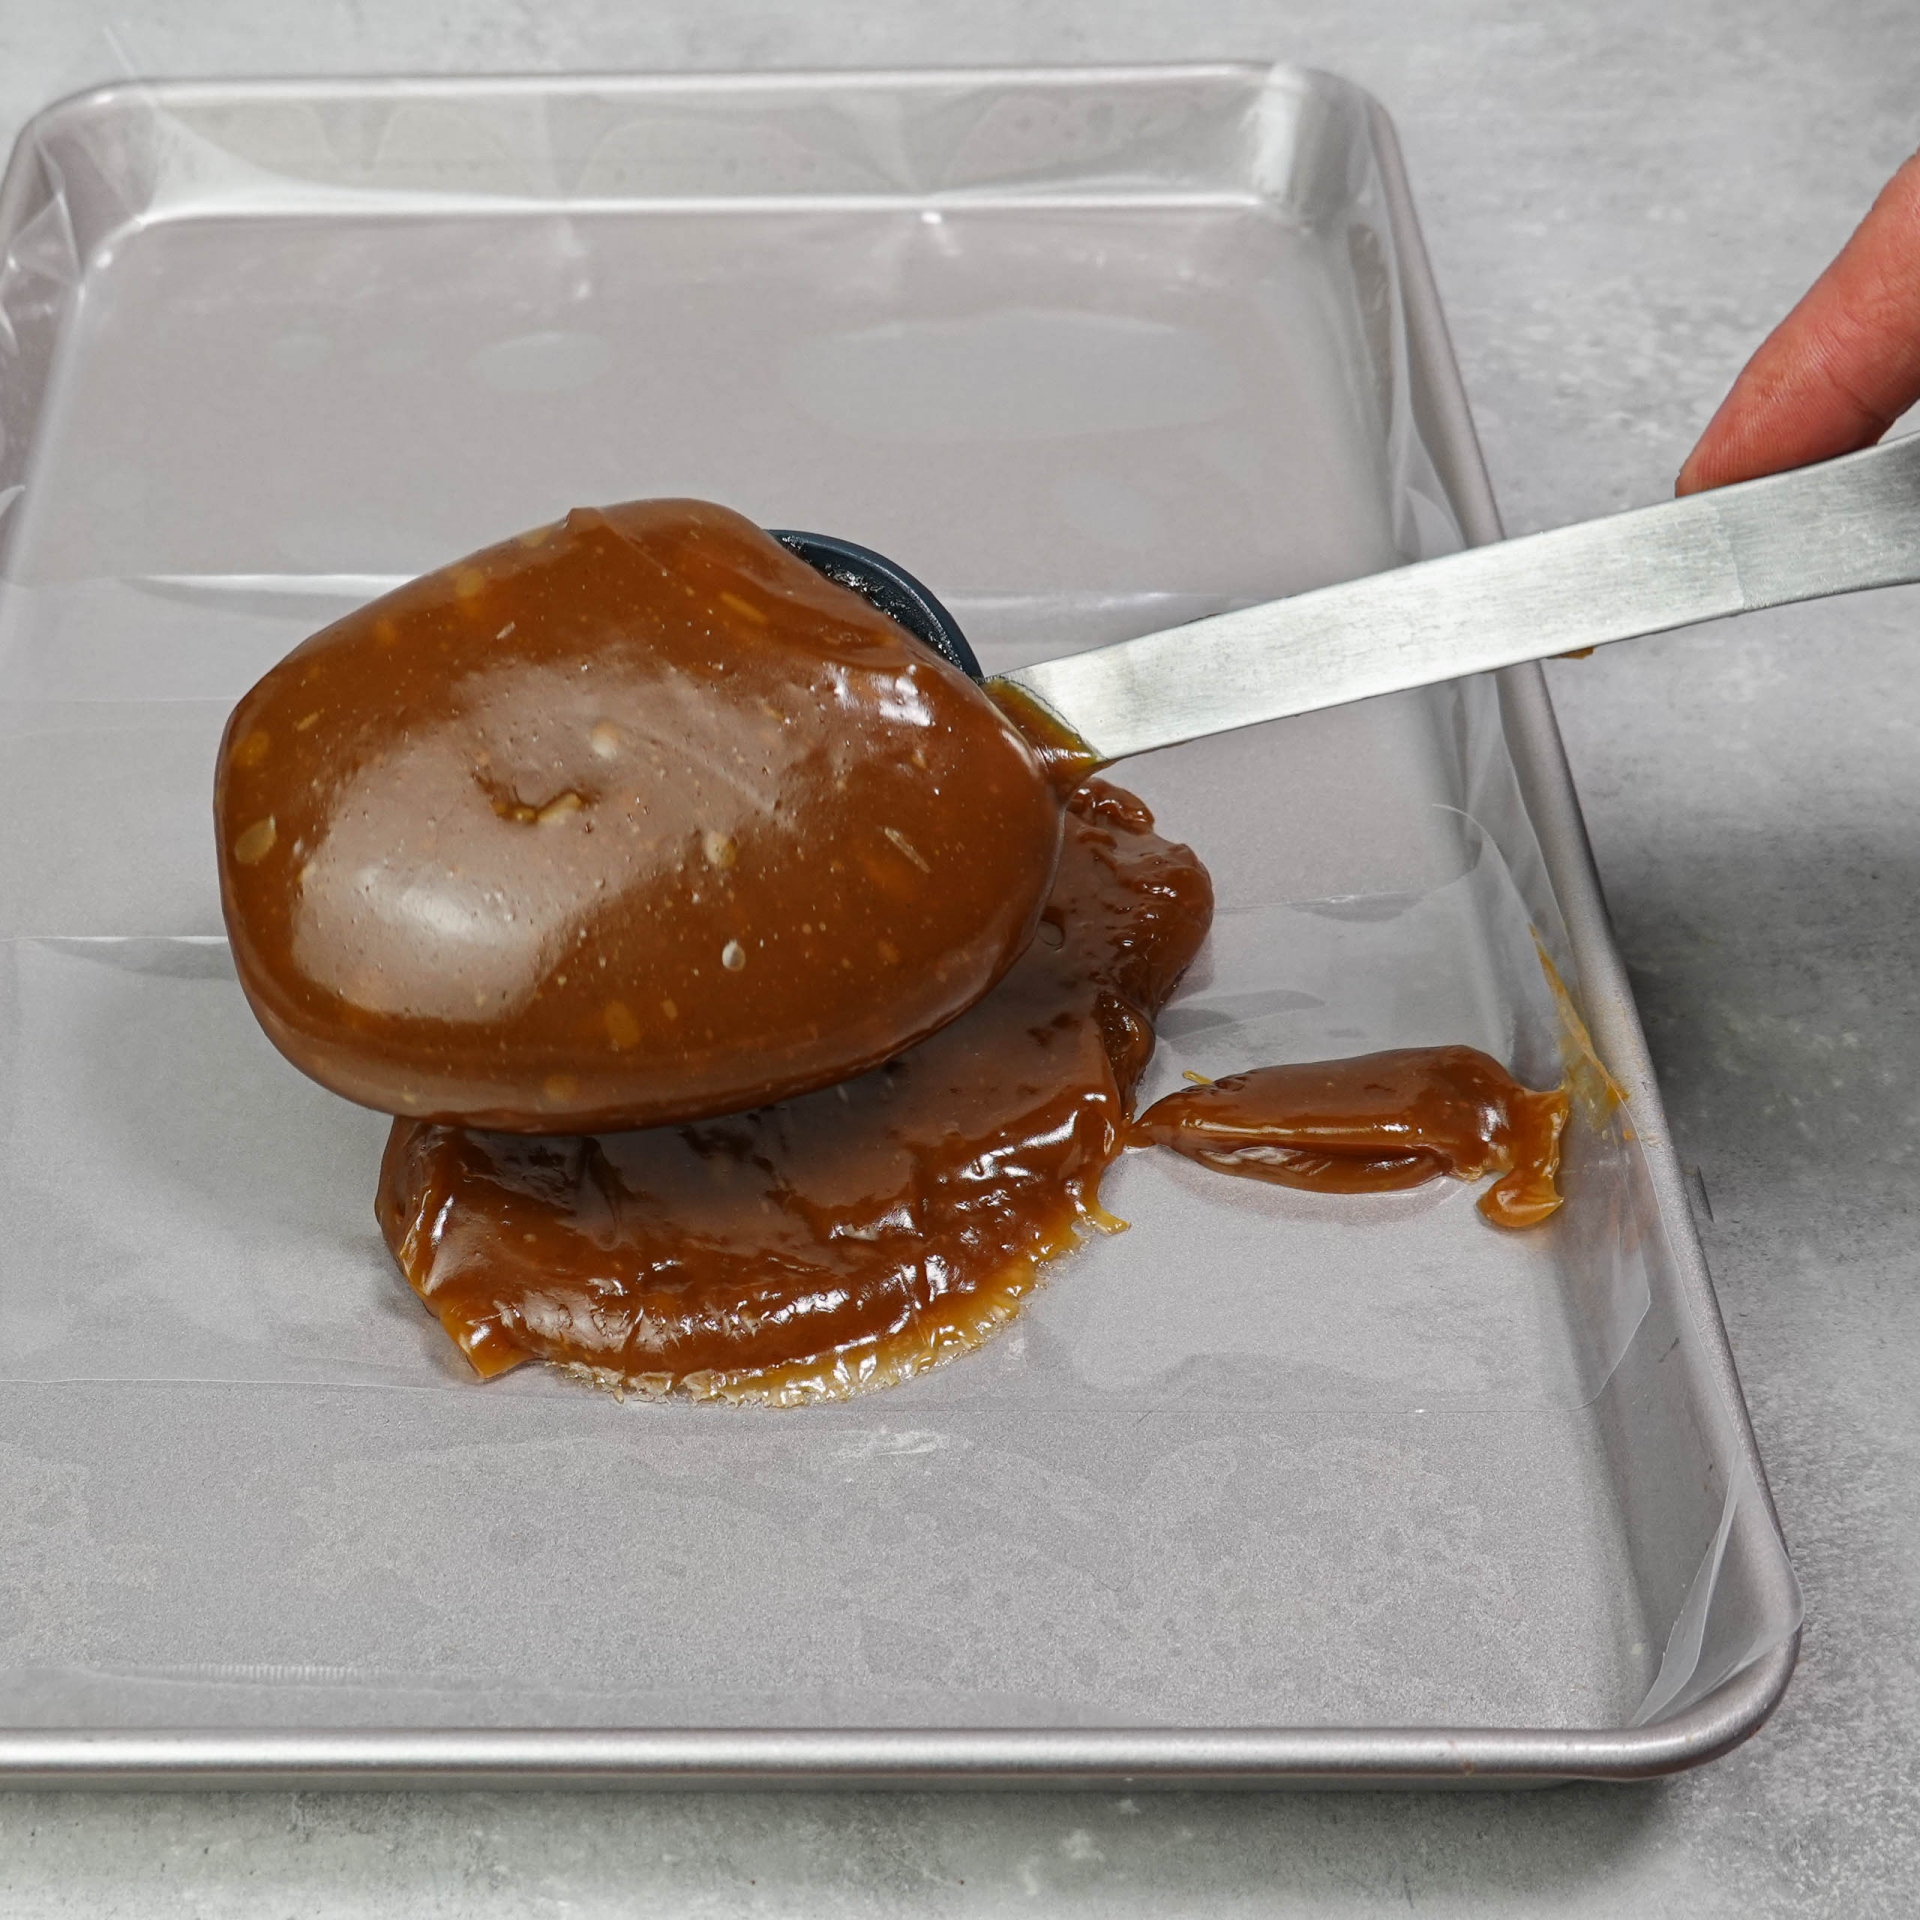 The deep brown caramel is spread on a small baking tray